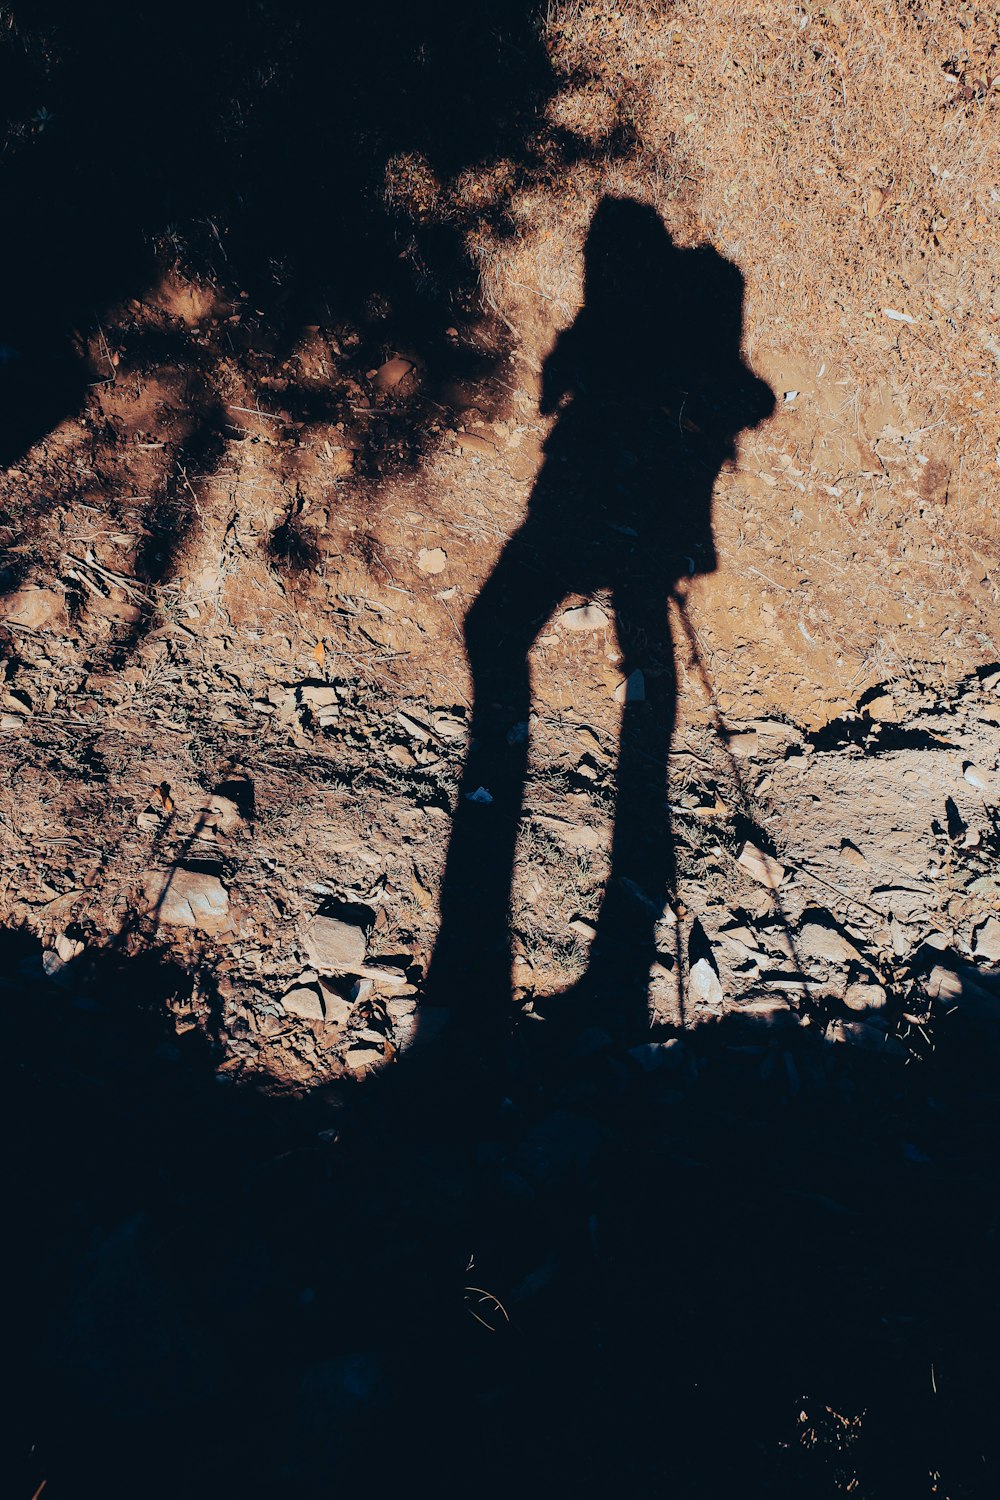 a shadow of a person on a rock